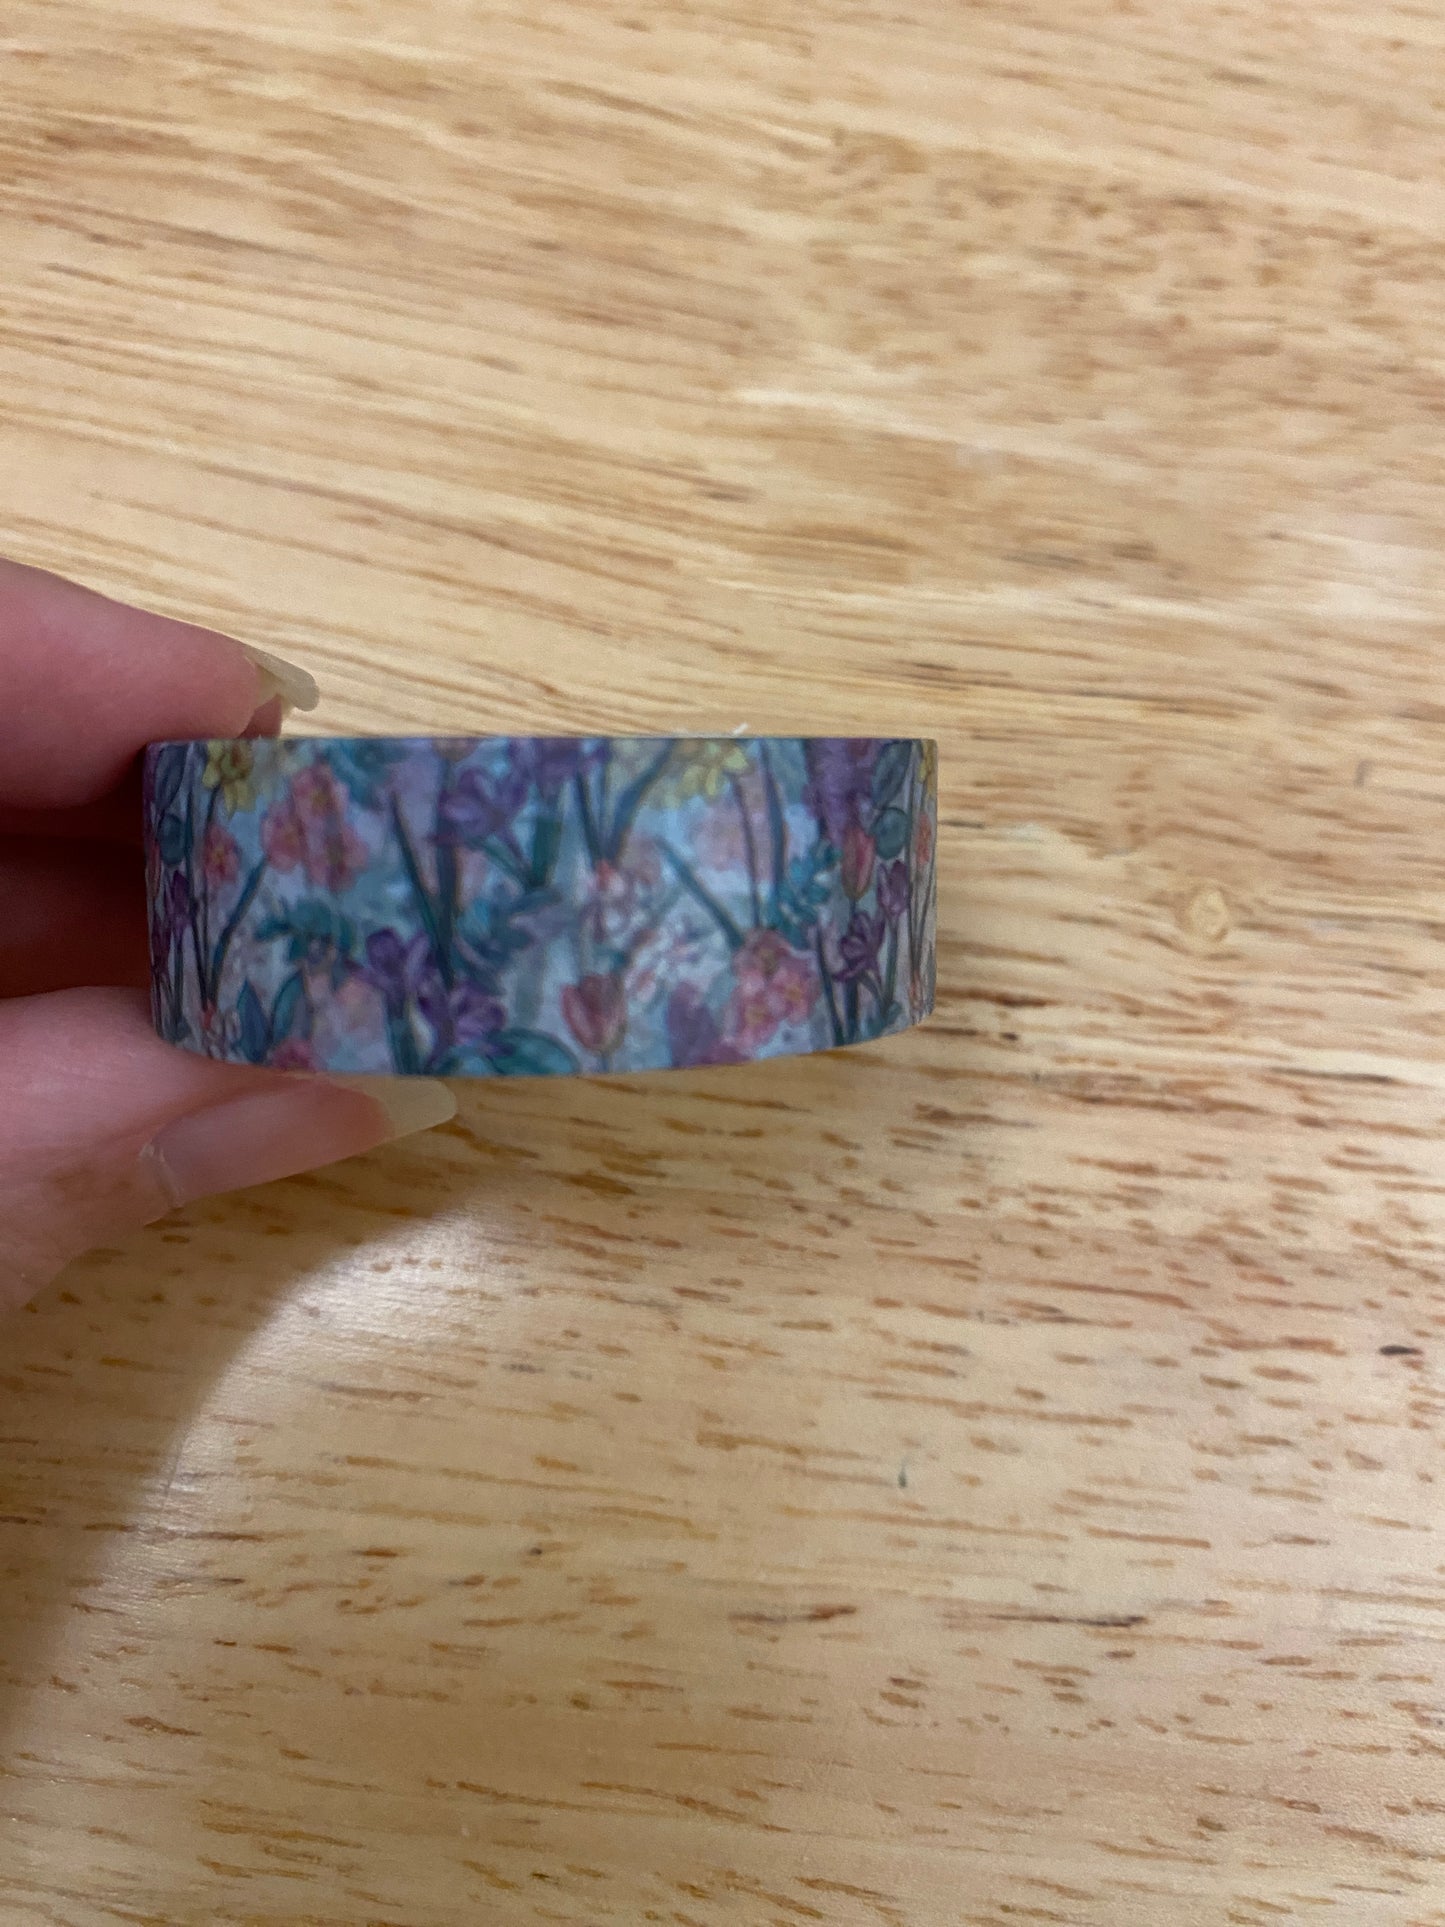 Big Roll of Grassy Wild Flowers Washi Tape, Flowers Washi Tape roll, Decorative Adhesive Masking Tapes, Floral Washi tape